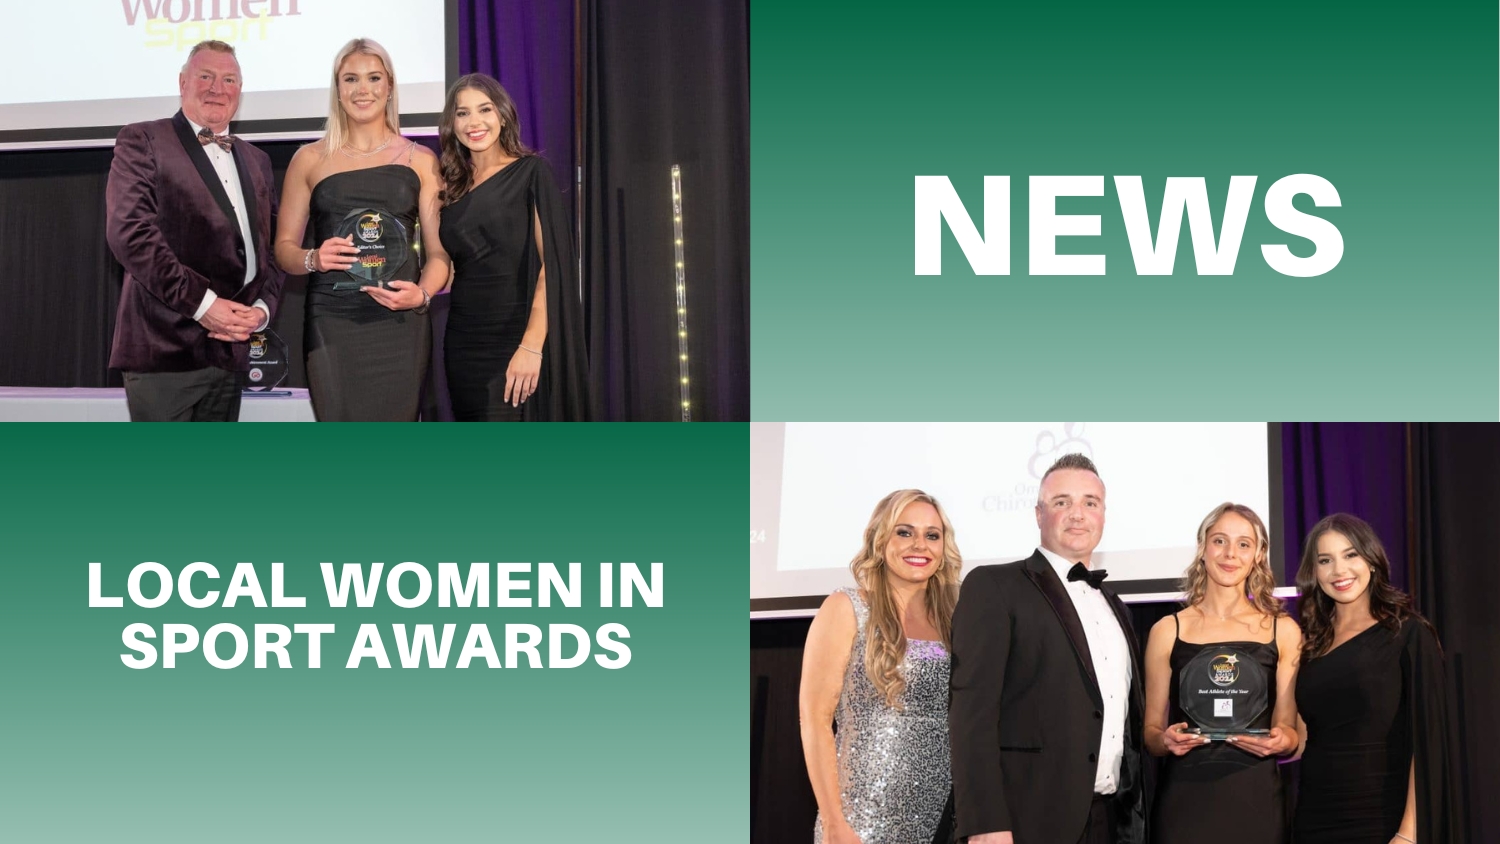 Outstanding Athletic Achievements at the Local Women in Sport Awards 